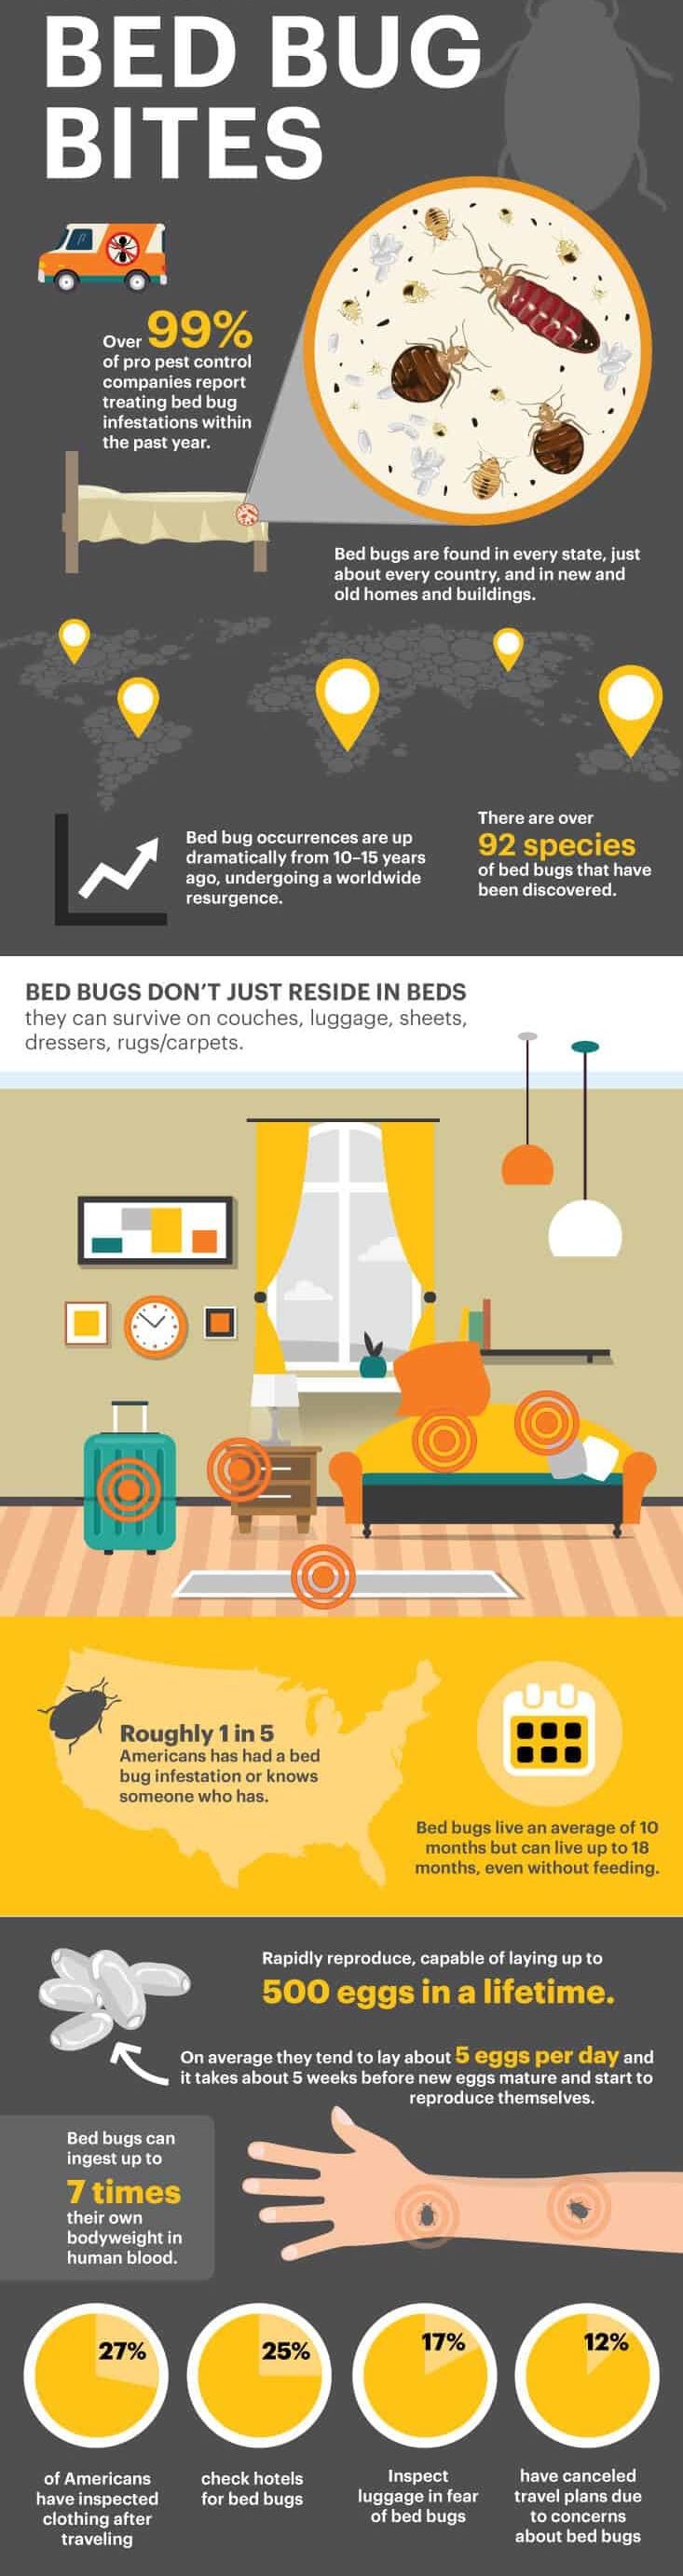 All about bed bug bites - Dr. Axe